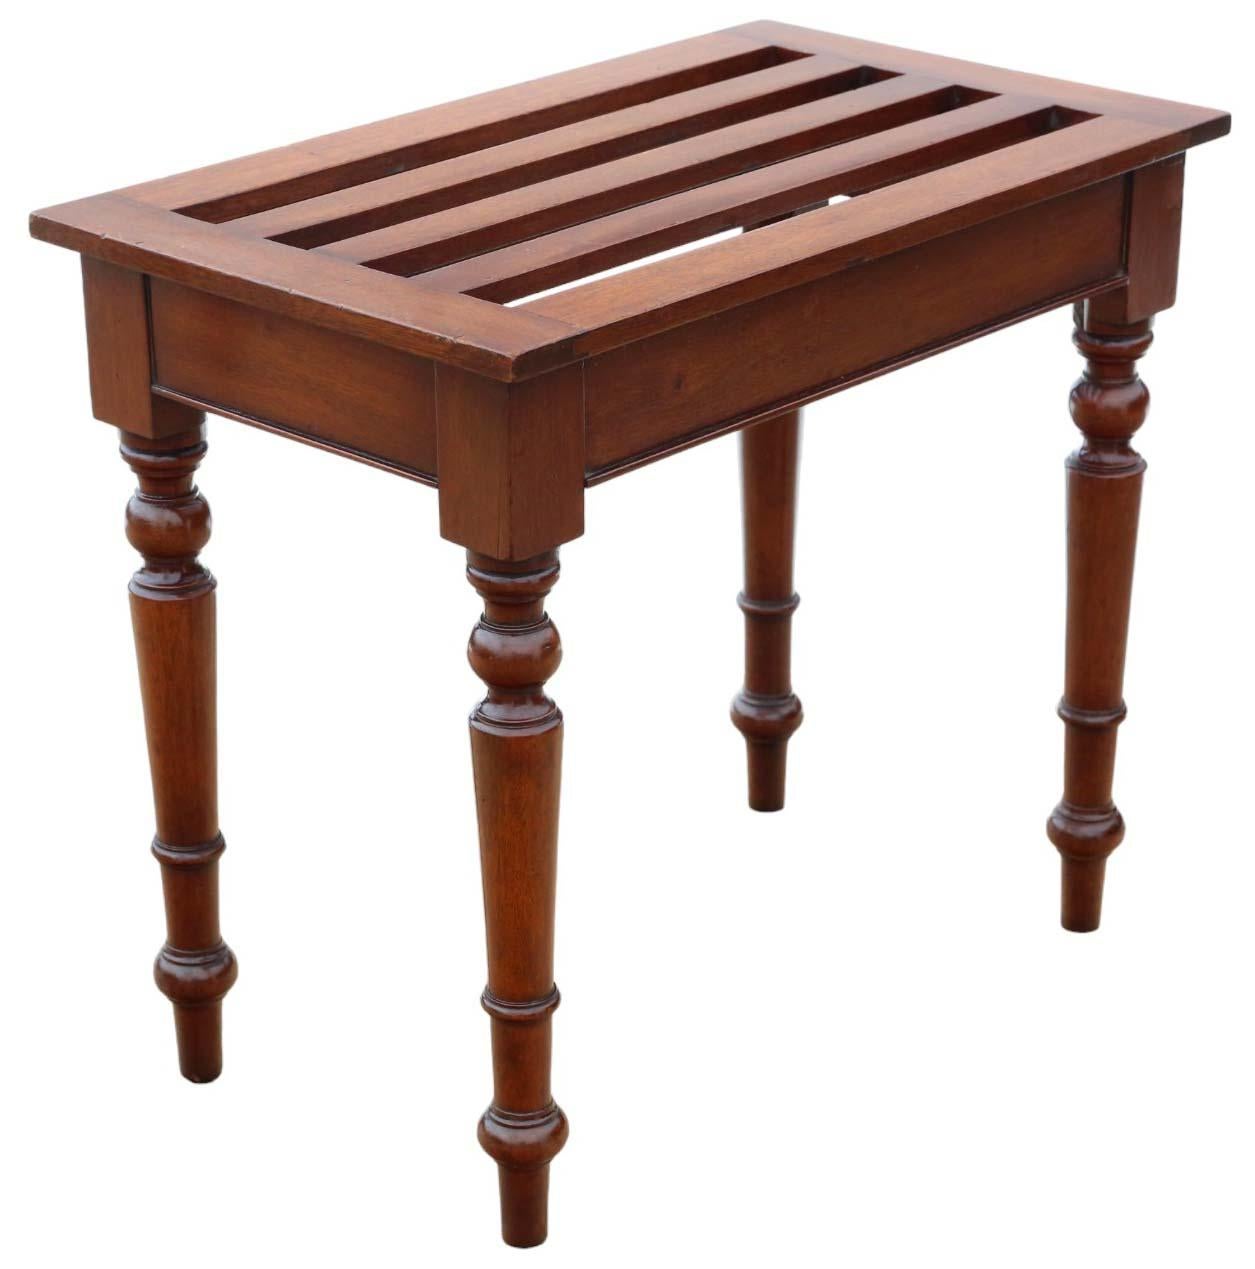 20th Century Vintage Retro Mahogany Luggage Stand - Quality Rack in Victorian Style For Sale